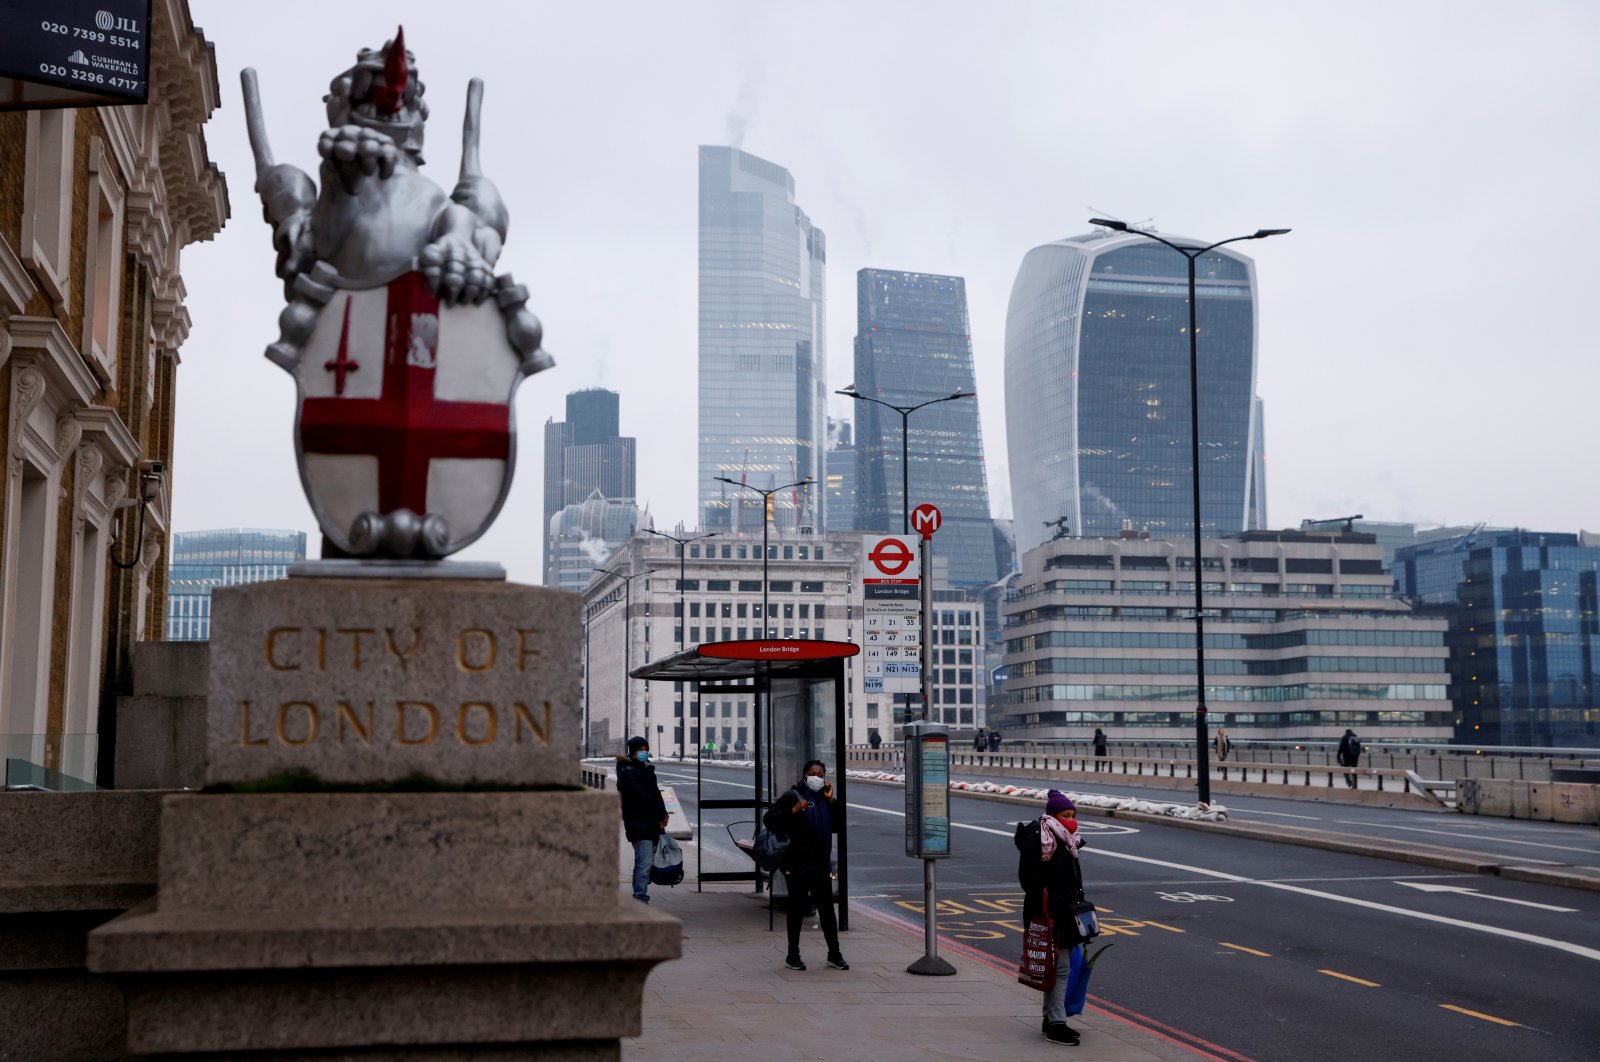 People wearing face masks wait at a bus stop on London Bridge, amid the outbreak of the coronavirus disease (COVID-19), with the City of London financial district in the background, Britain, Jan. 8, 2021. (Reuters Photo)